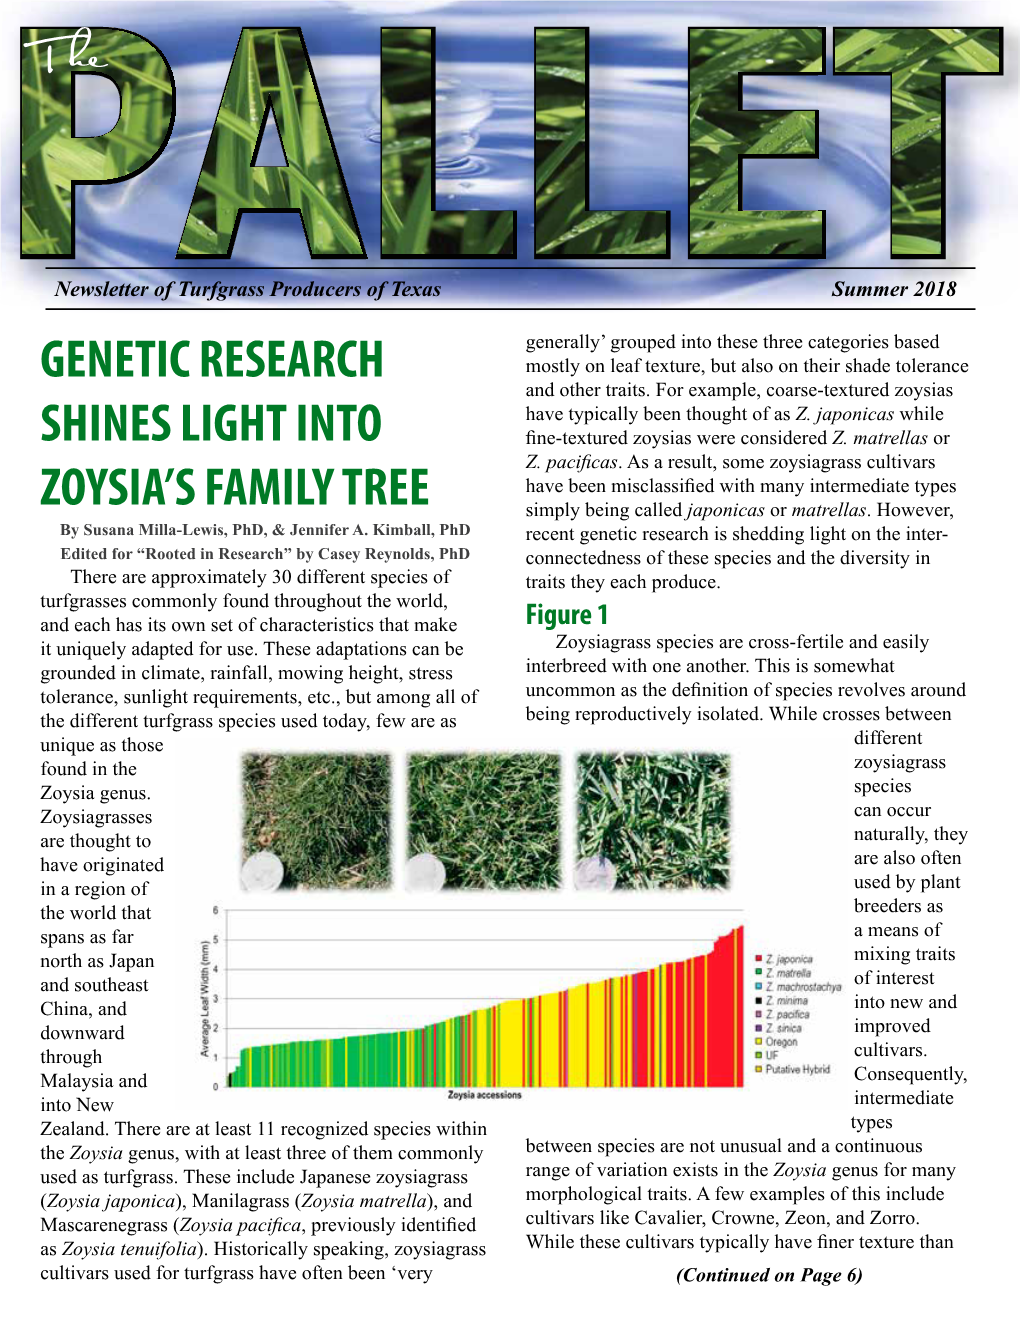 Genetic Research Shines Light Into Zoysia's Family Tree